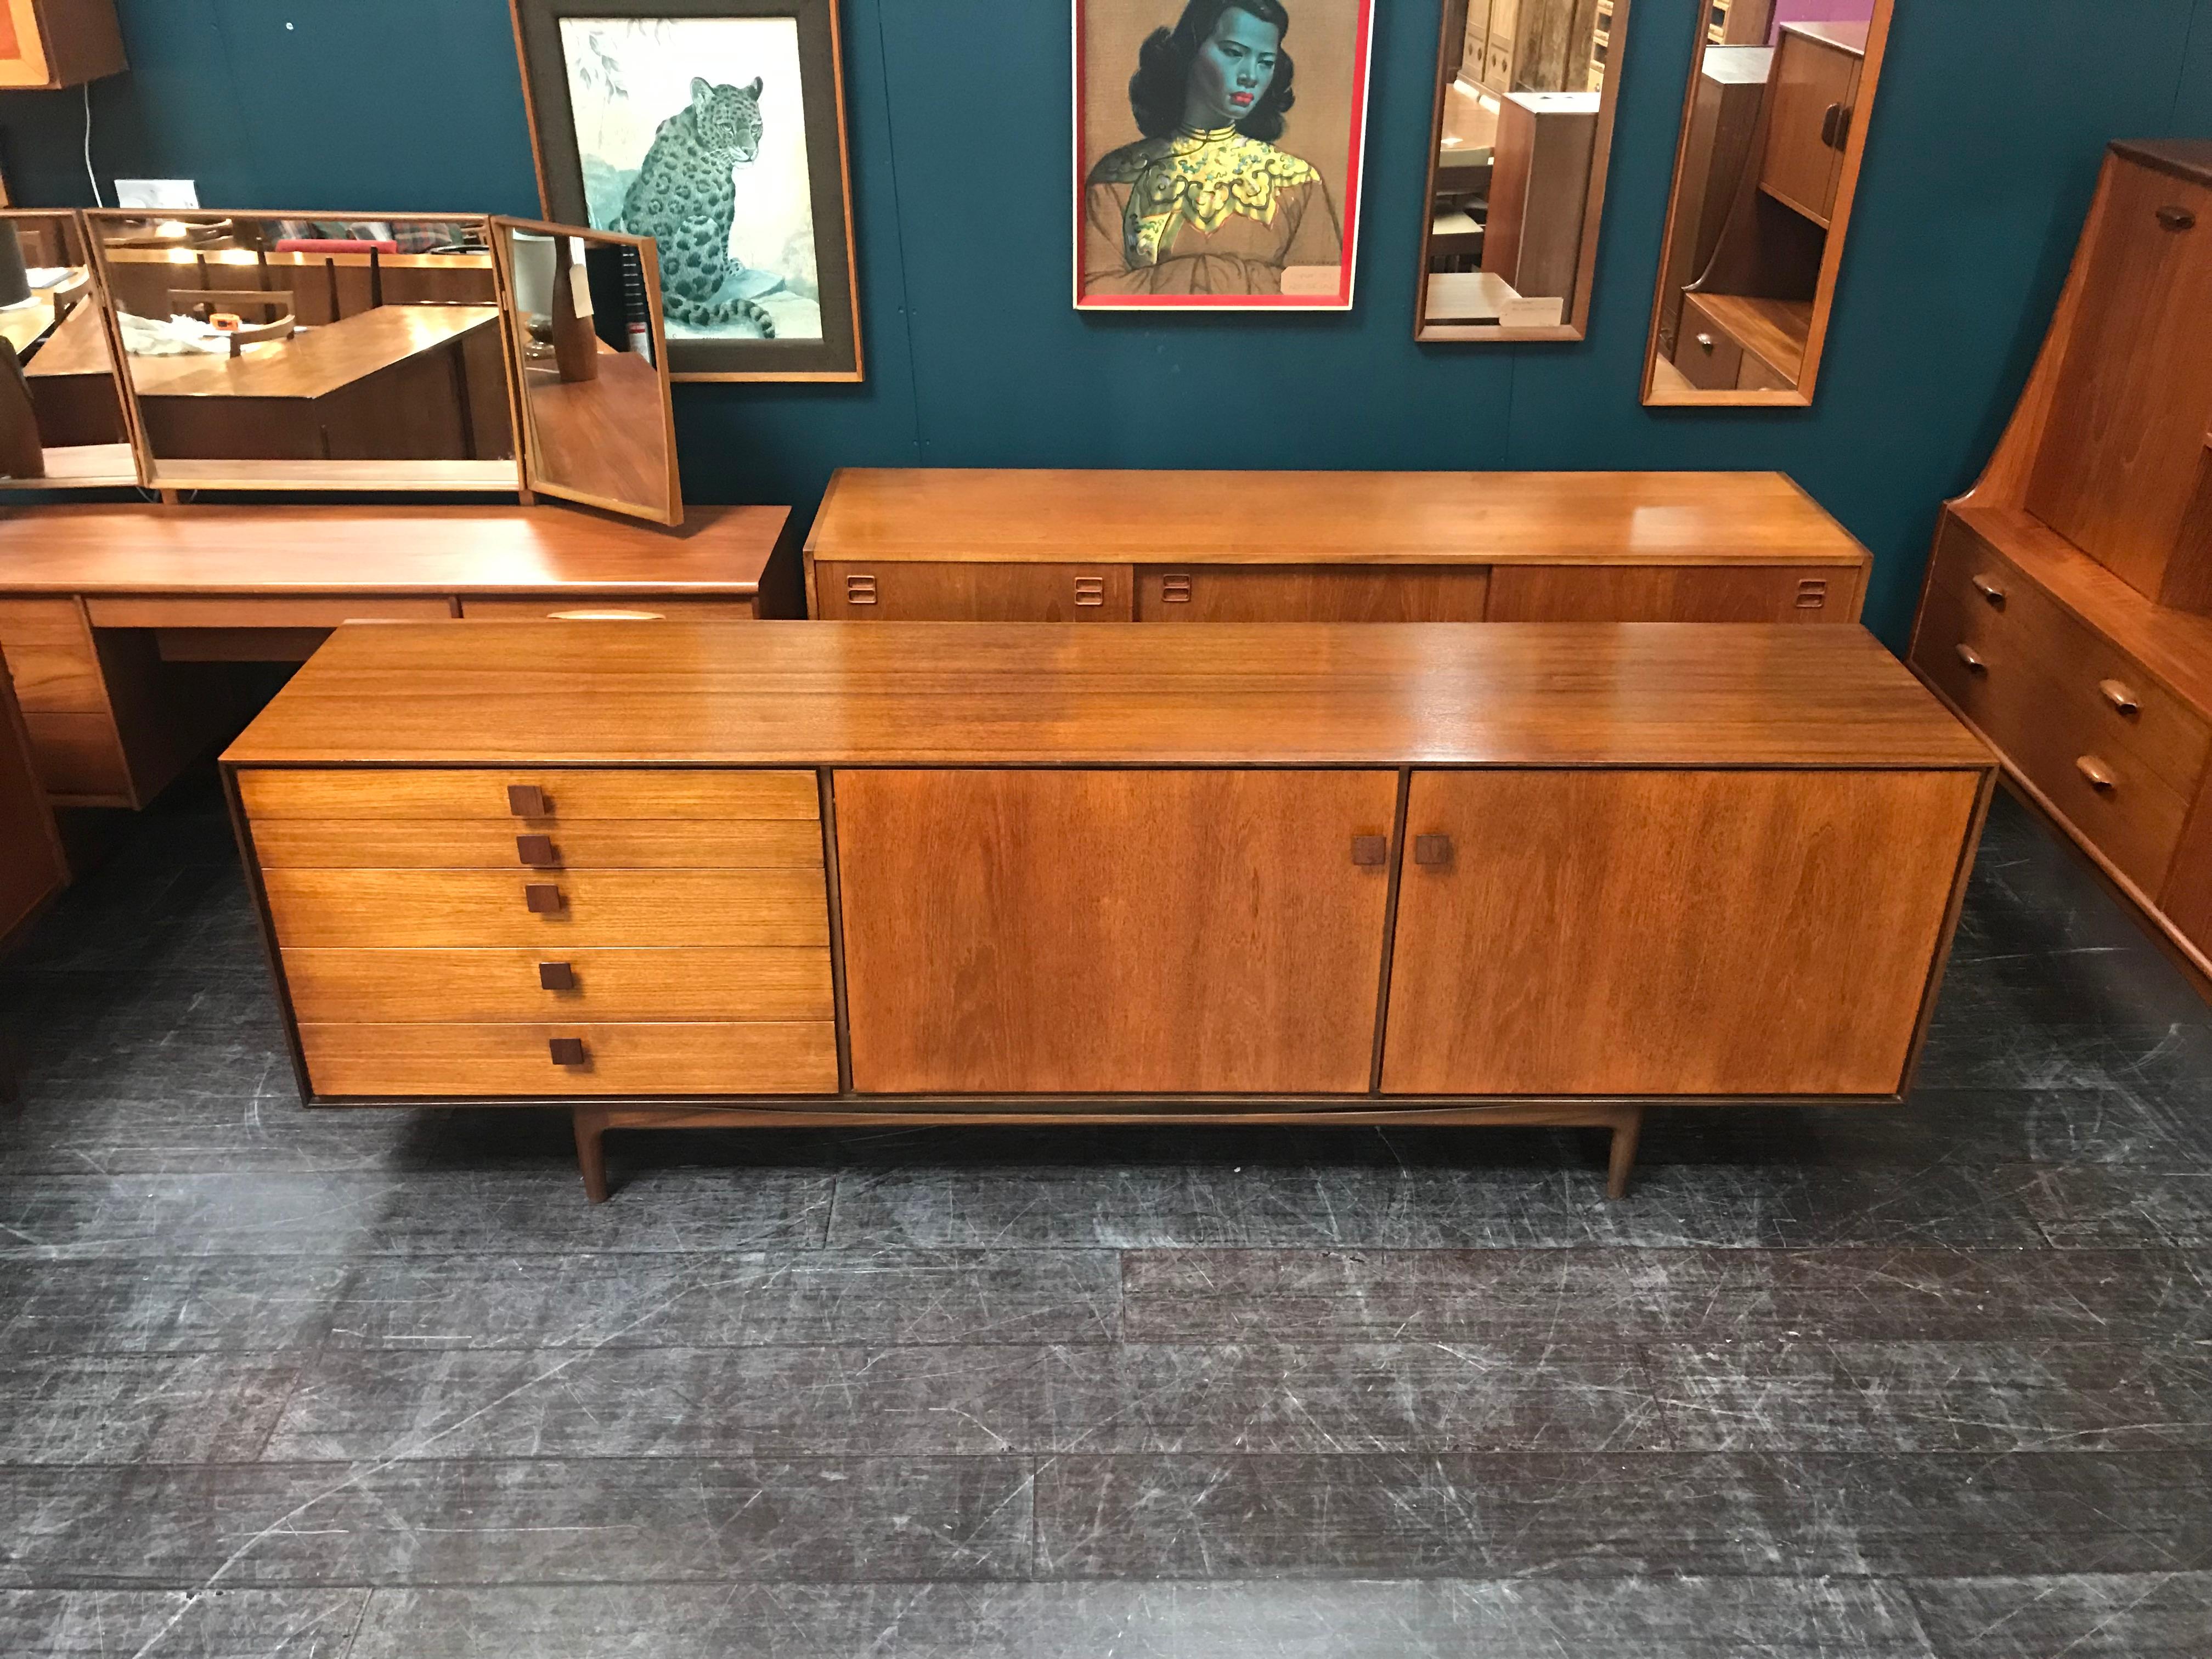 A very cool sideboard designed by the Danish Designer Ib Kofod Larsen for English maker G Plan. Made of a warm teak with beautiful lines and plenty of storage space, this vintage midcentury sideboard has 5 drawers and shelved cupboards. A